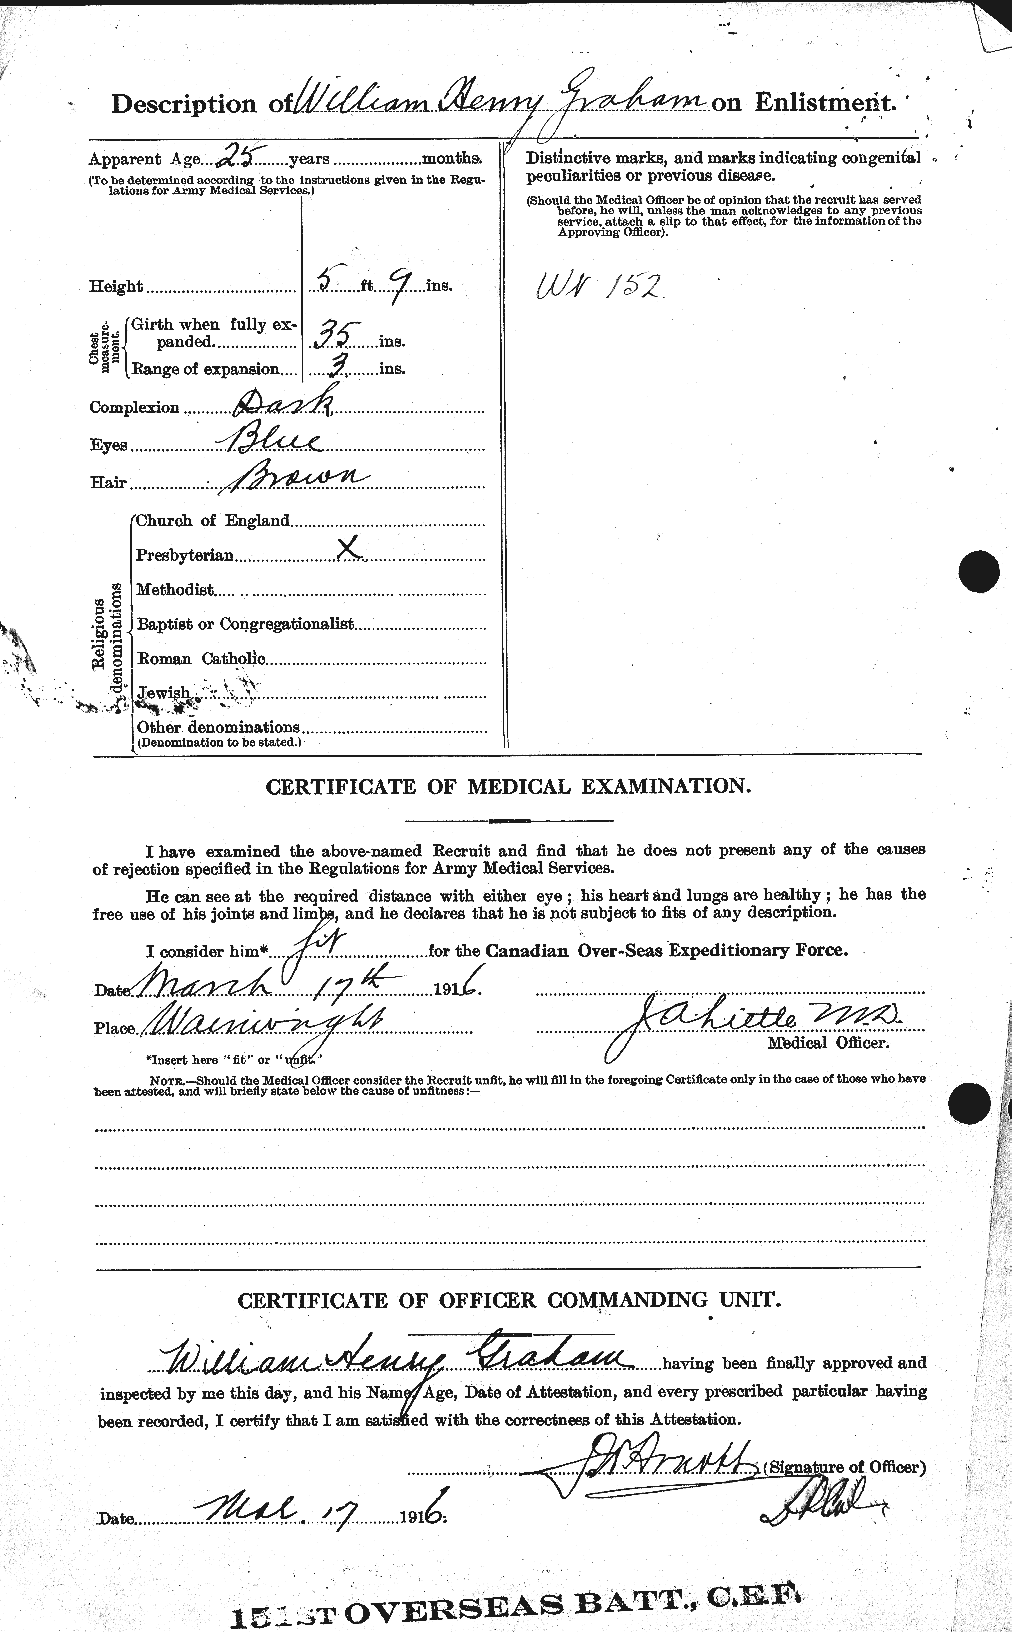 Personnel Records of the First World War - CEF 358001b